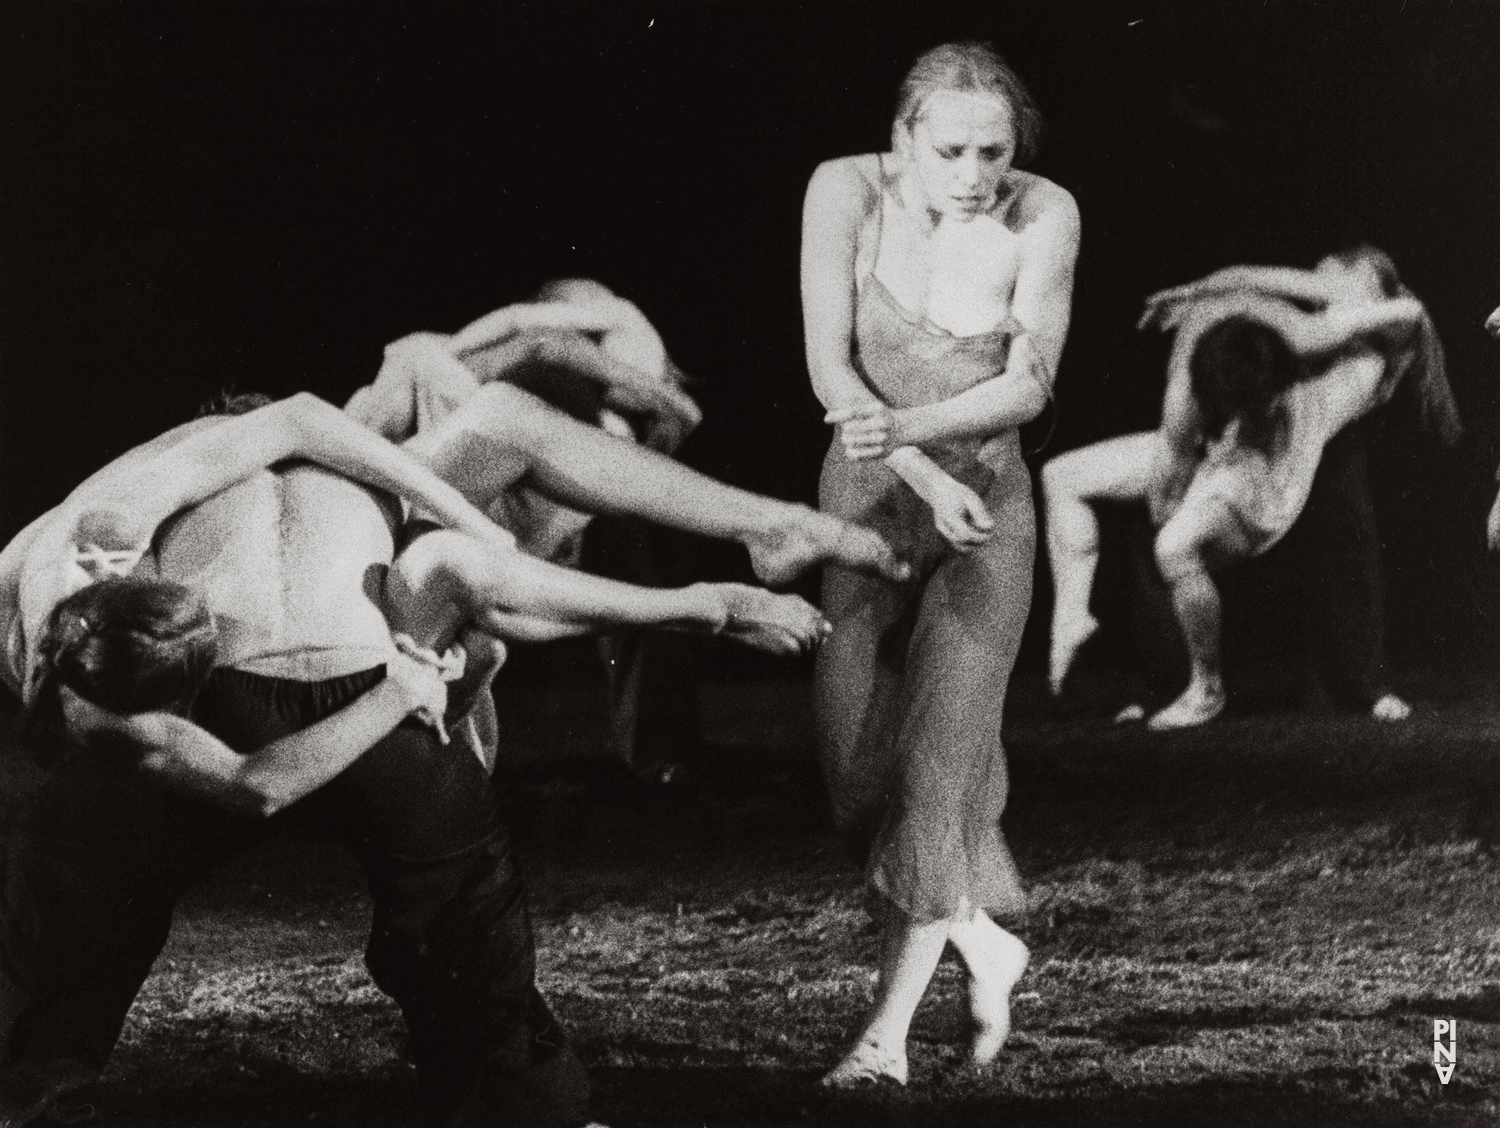 Marlis Alt and Michael Diekamp in “The Rite of Spring” by Pina Bausch